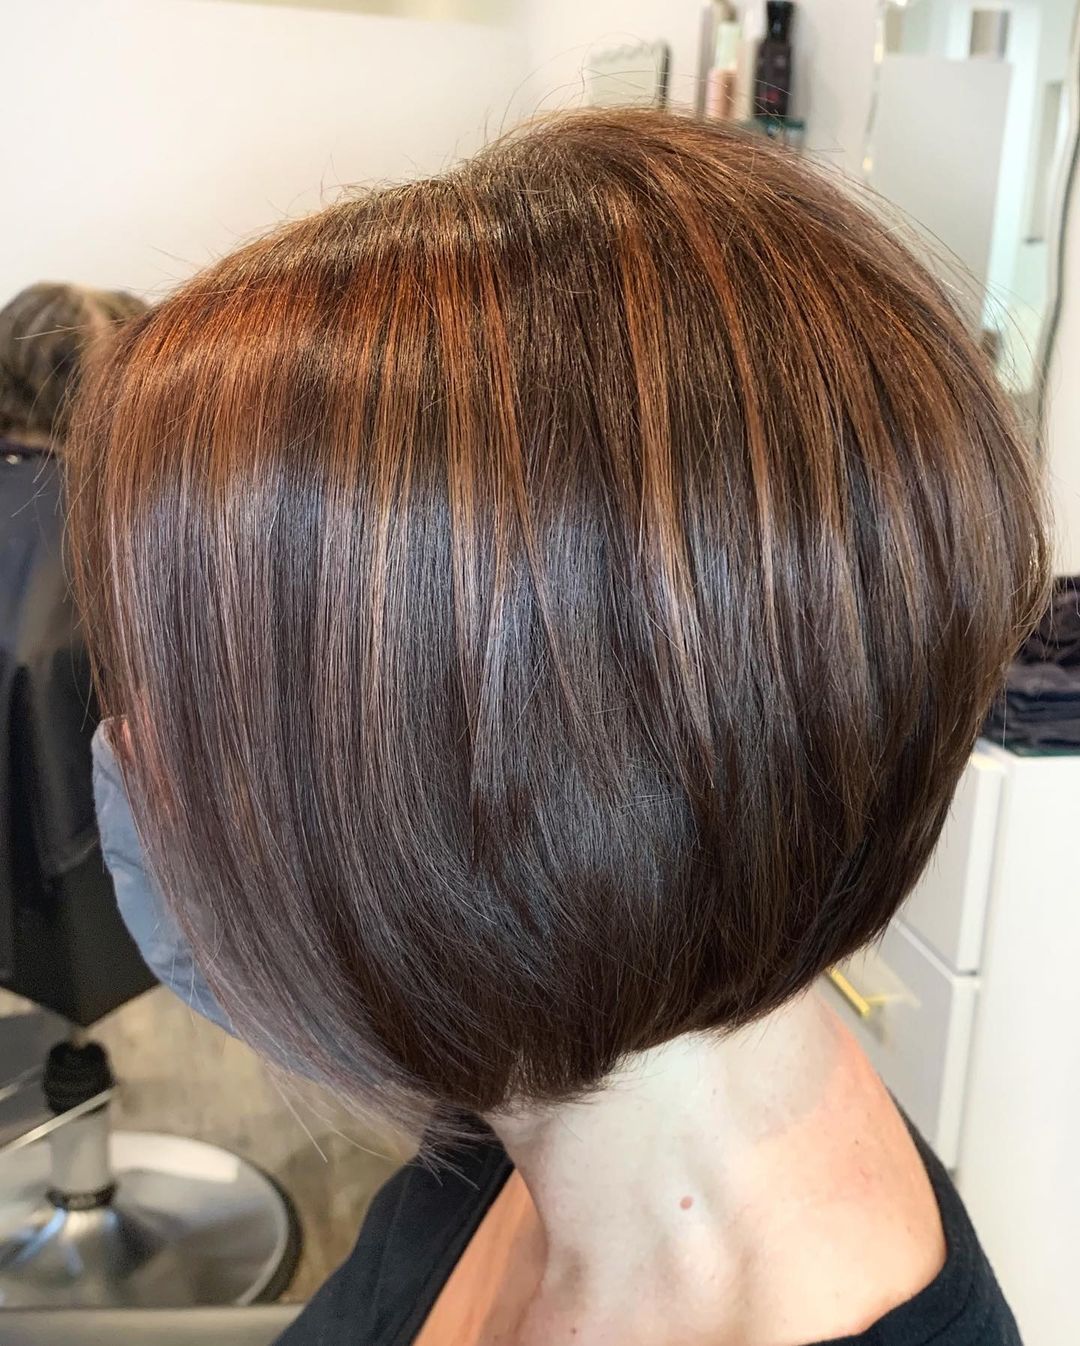 Stacked Bob 119 Long stacked bob | Medium length stacked bob | Pictures of stacked bob haircuts front and back Stacked Bob Hairstyles for Women